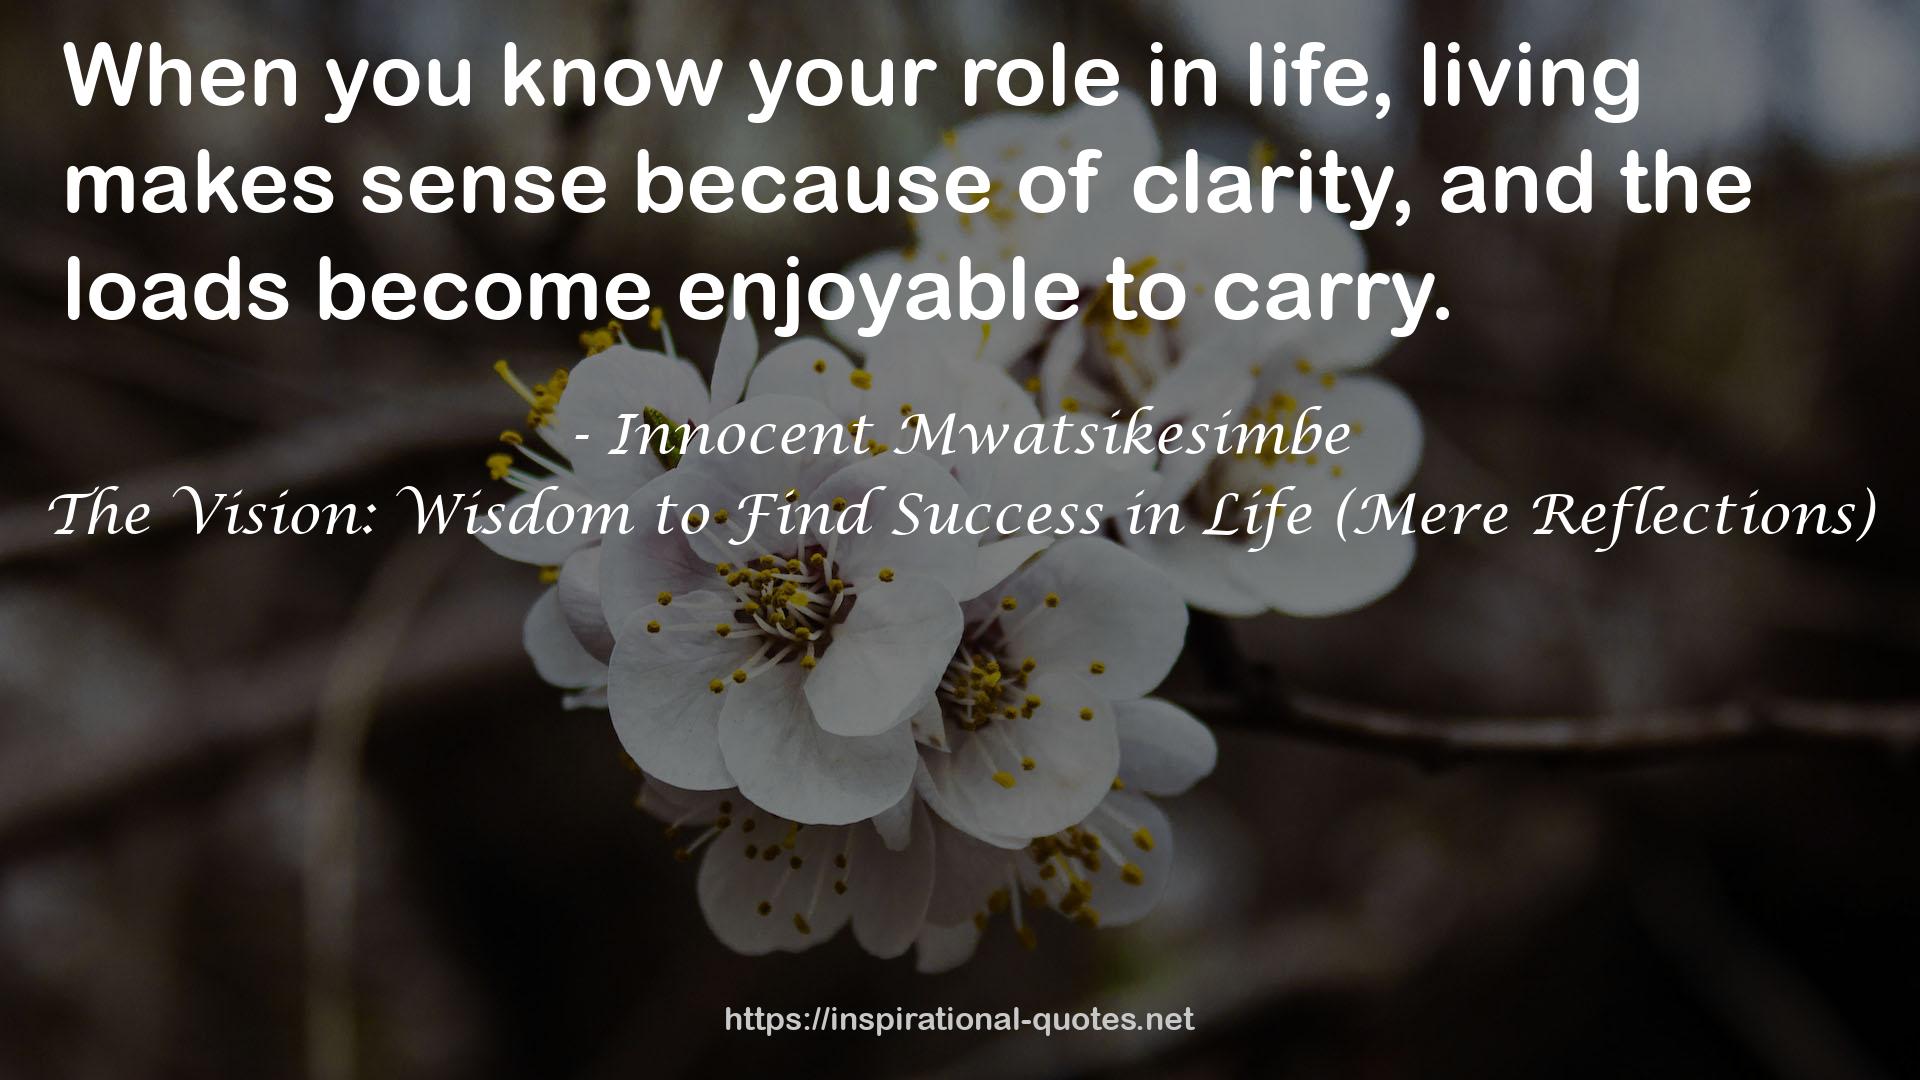 The Vision: Wisdom to Find Success in Life (Mere Reflections) QUOTES